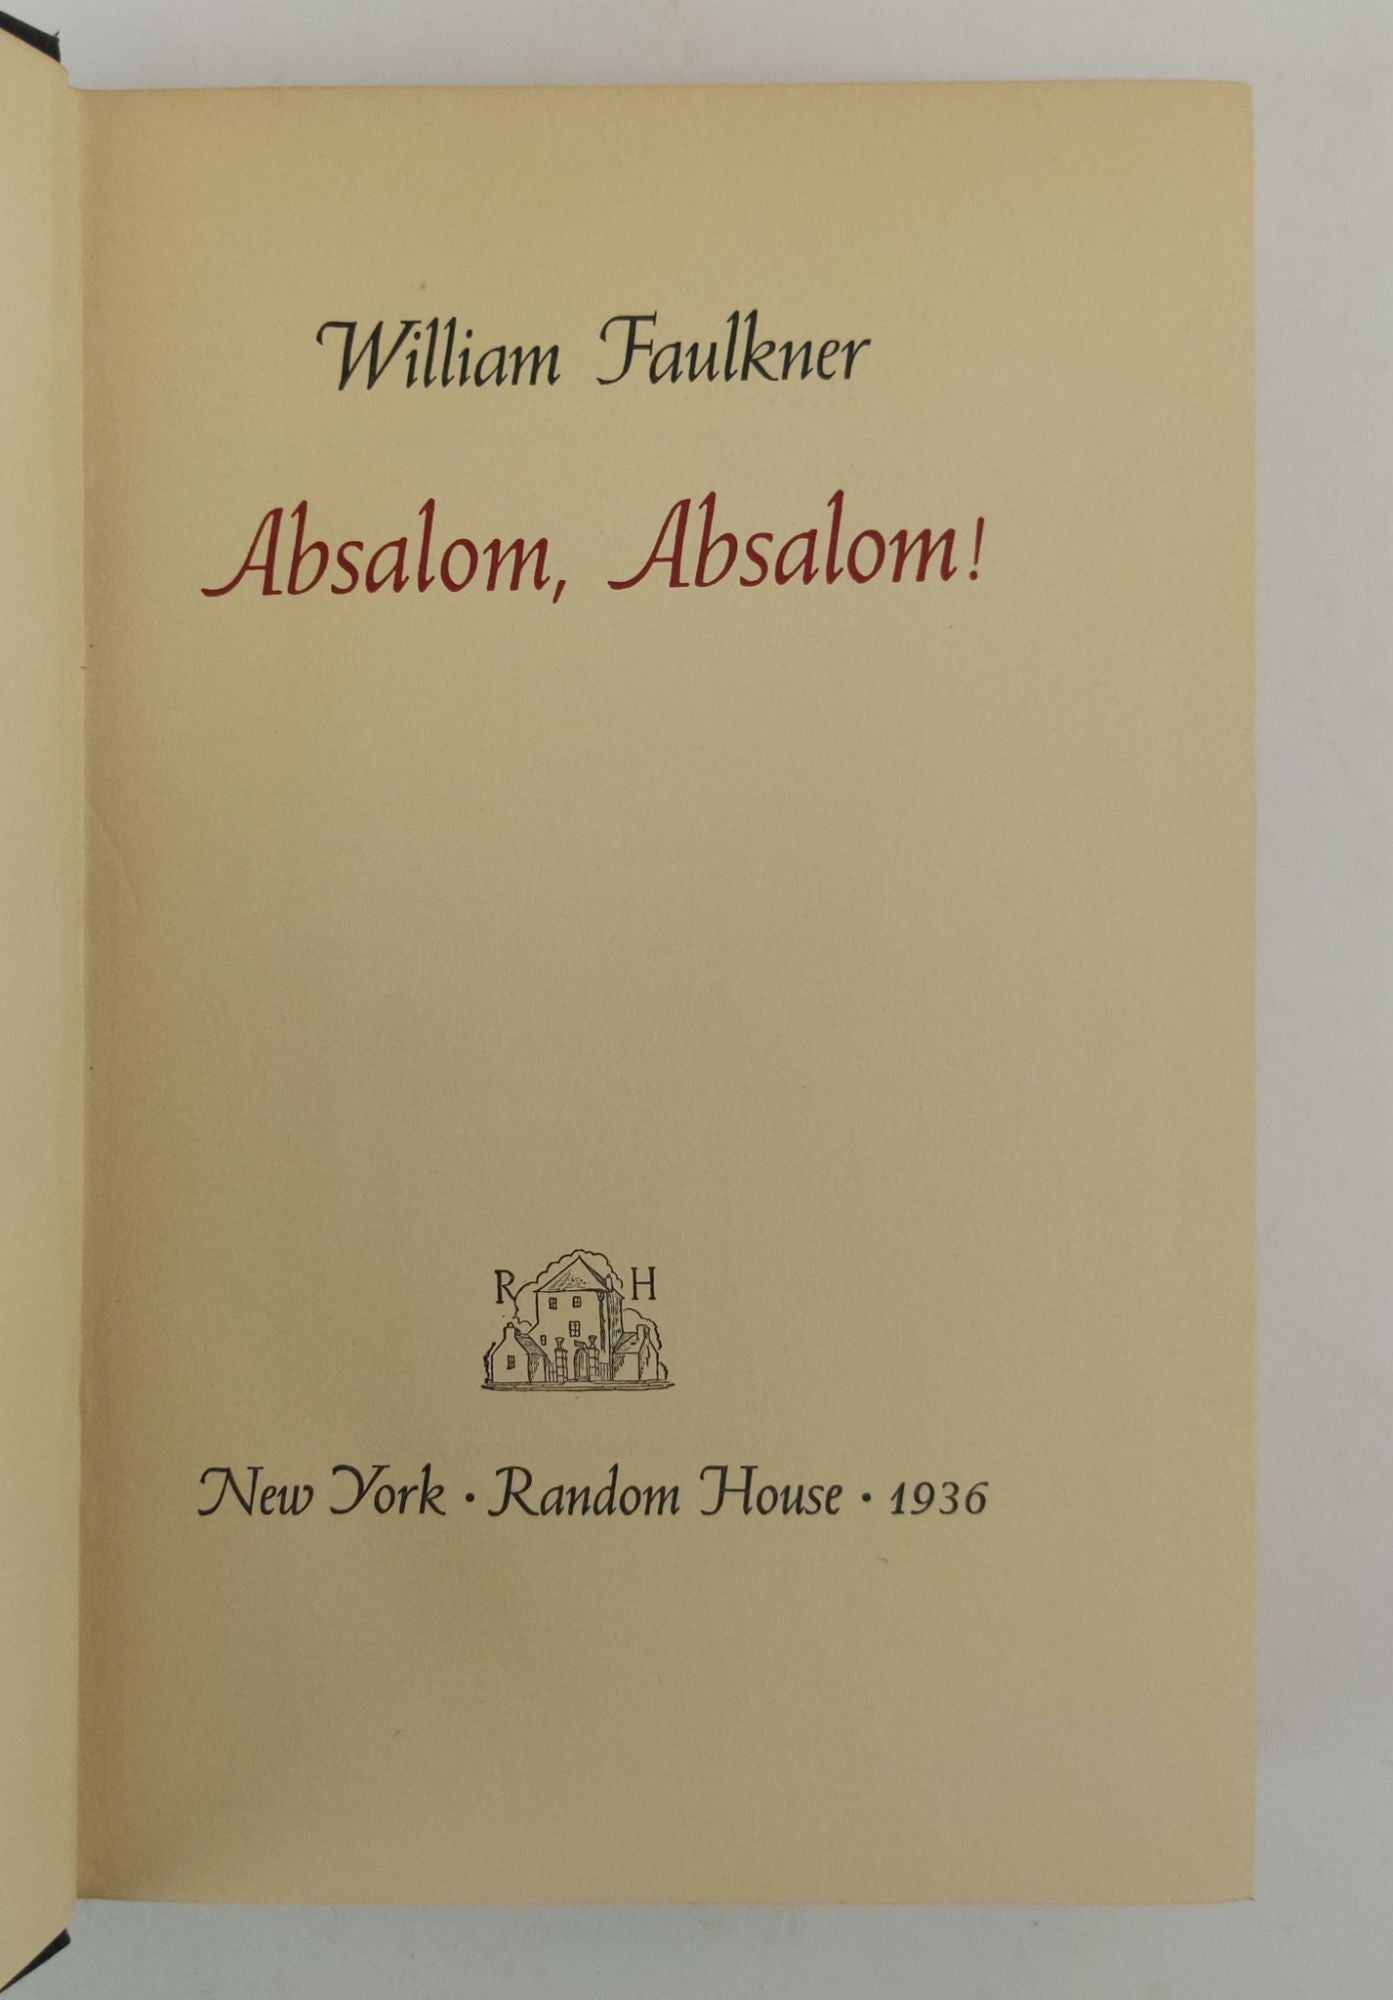 Product Image for ABSALOM, ABSALOM!